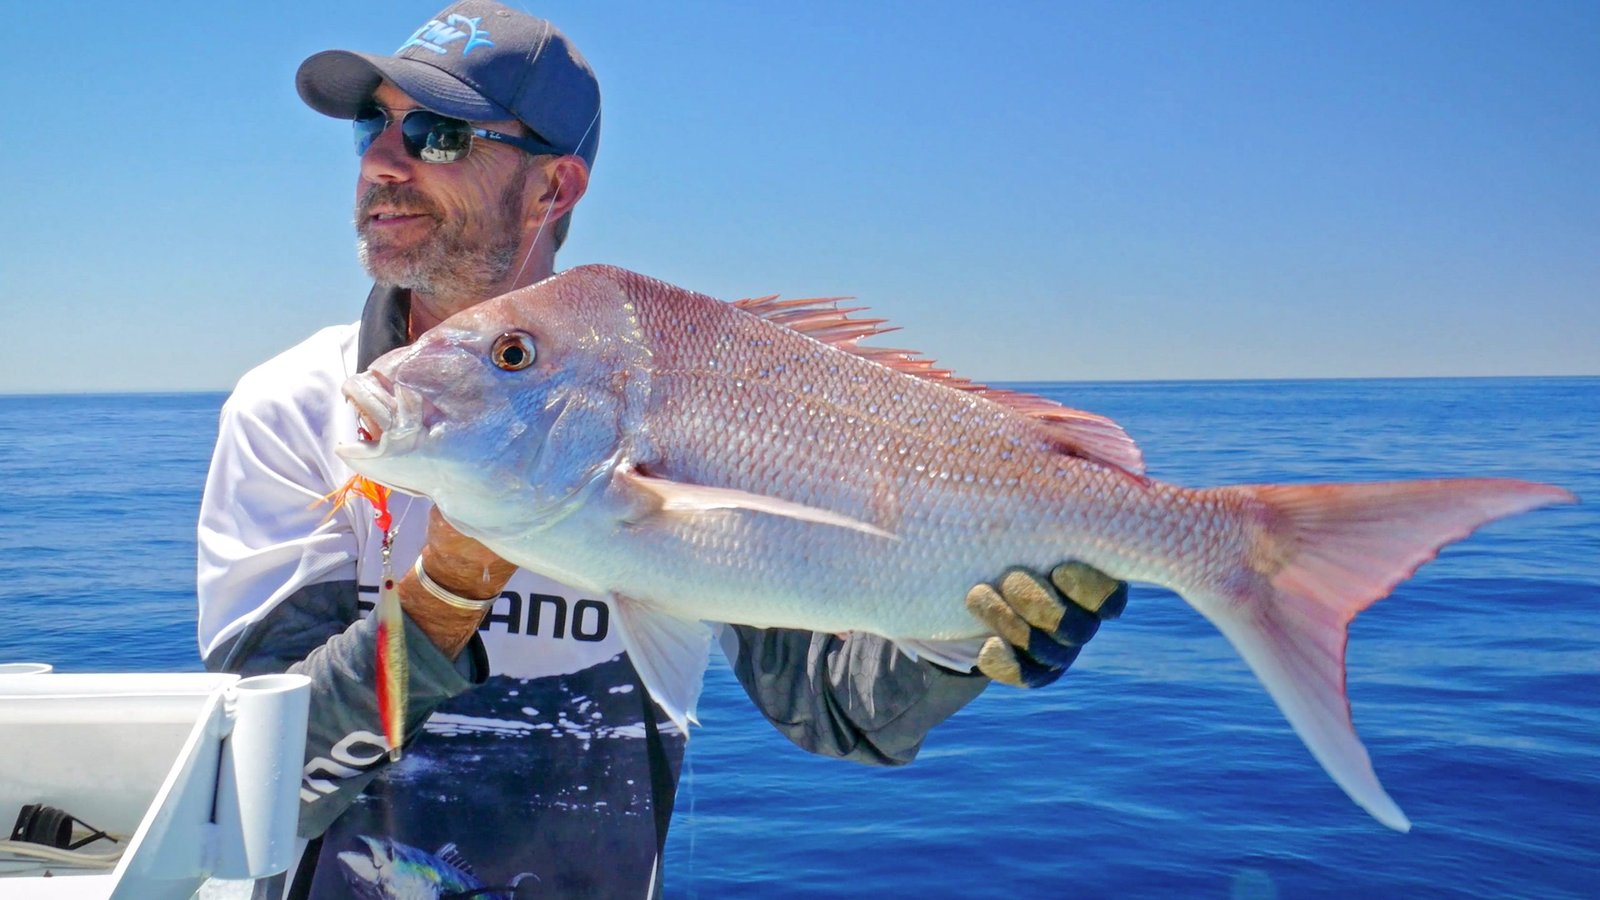 Nick Hocking with a Snapper